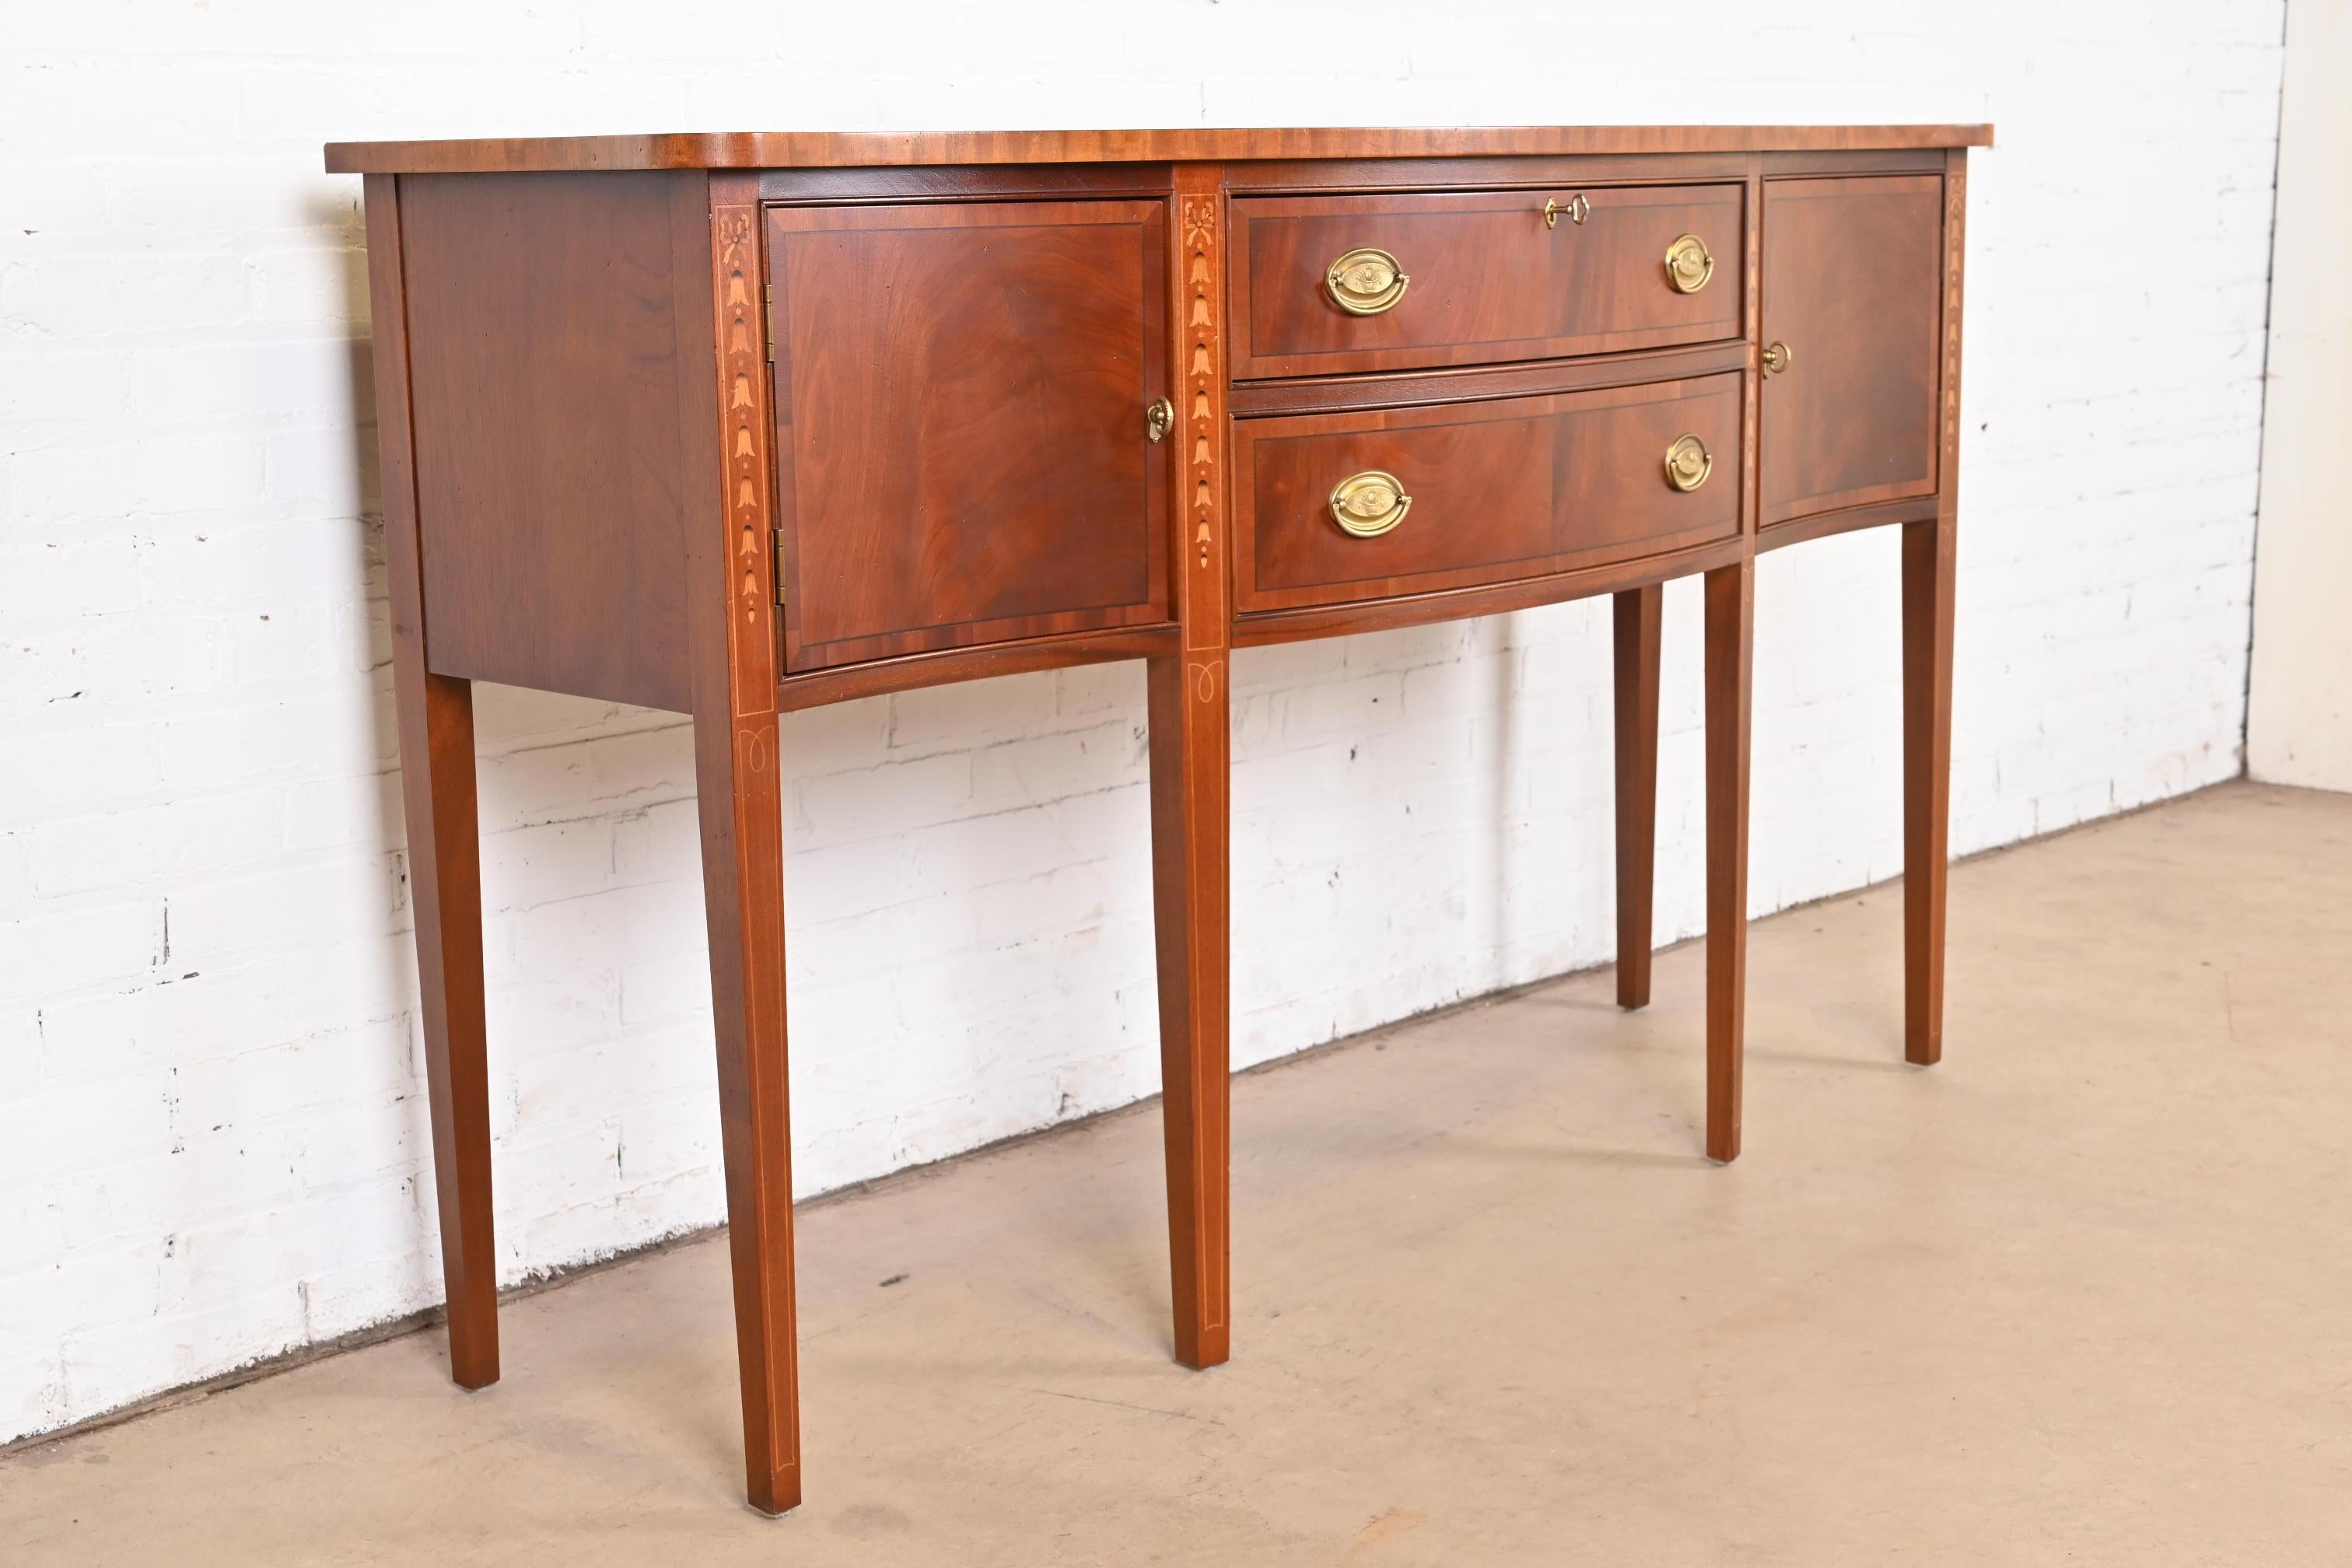 Brass Hepplewhite Inlaid Mahogany Serpentine Front Sideboard Buffet or Credenza For Sale